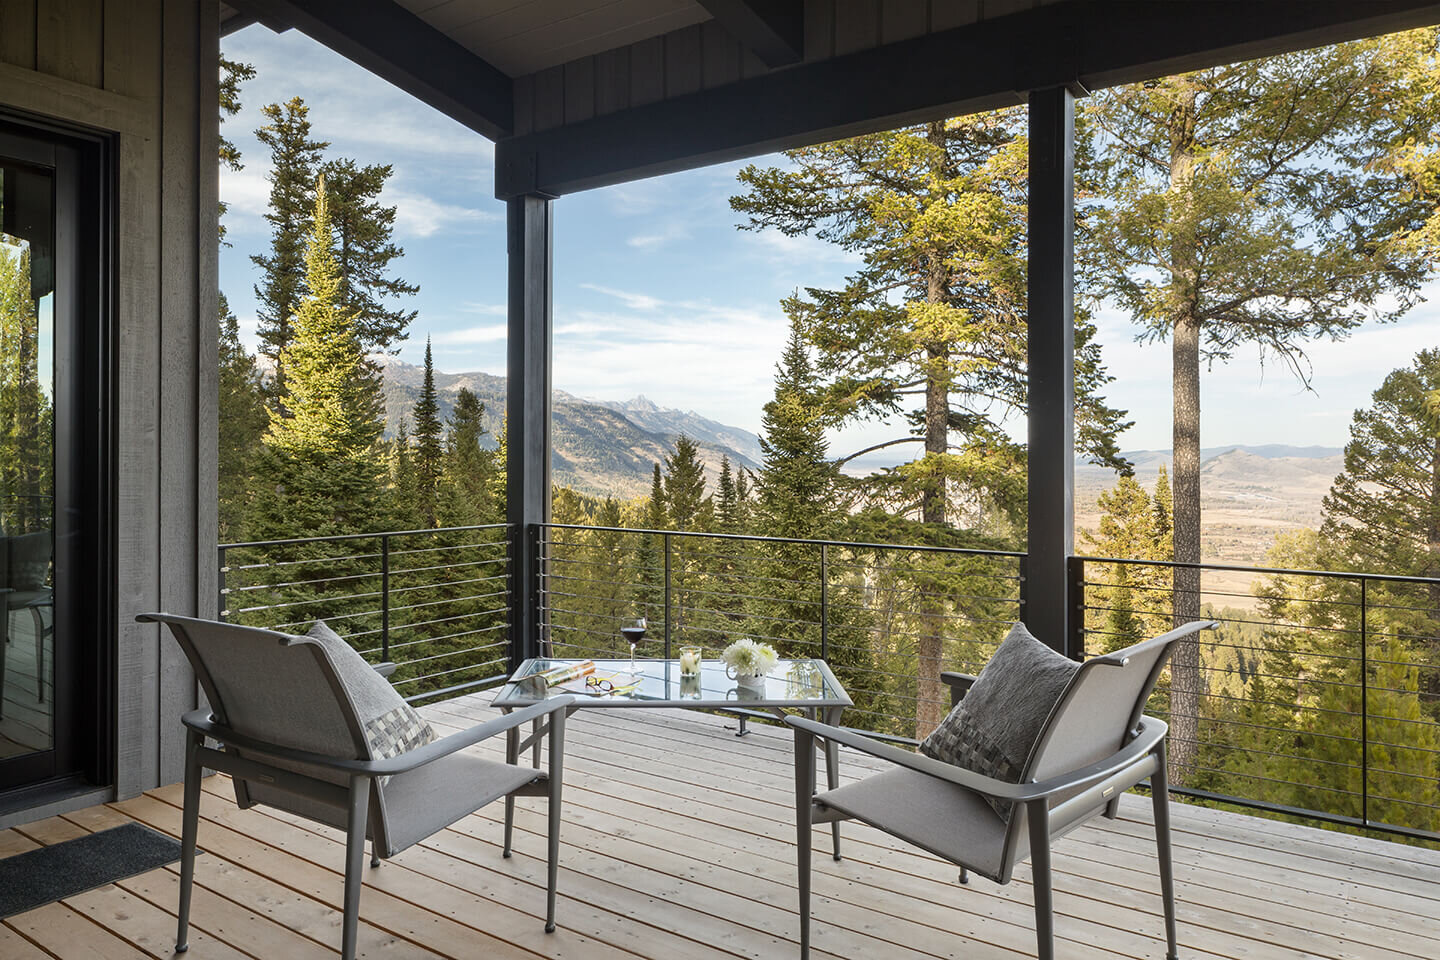 Covered patio with view of Teton range